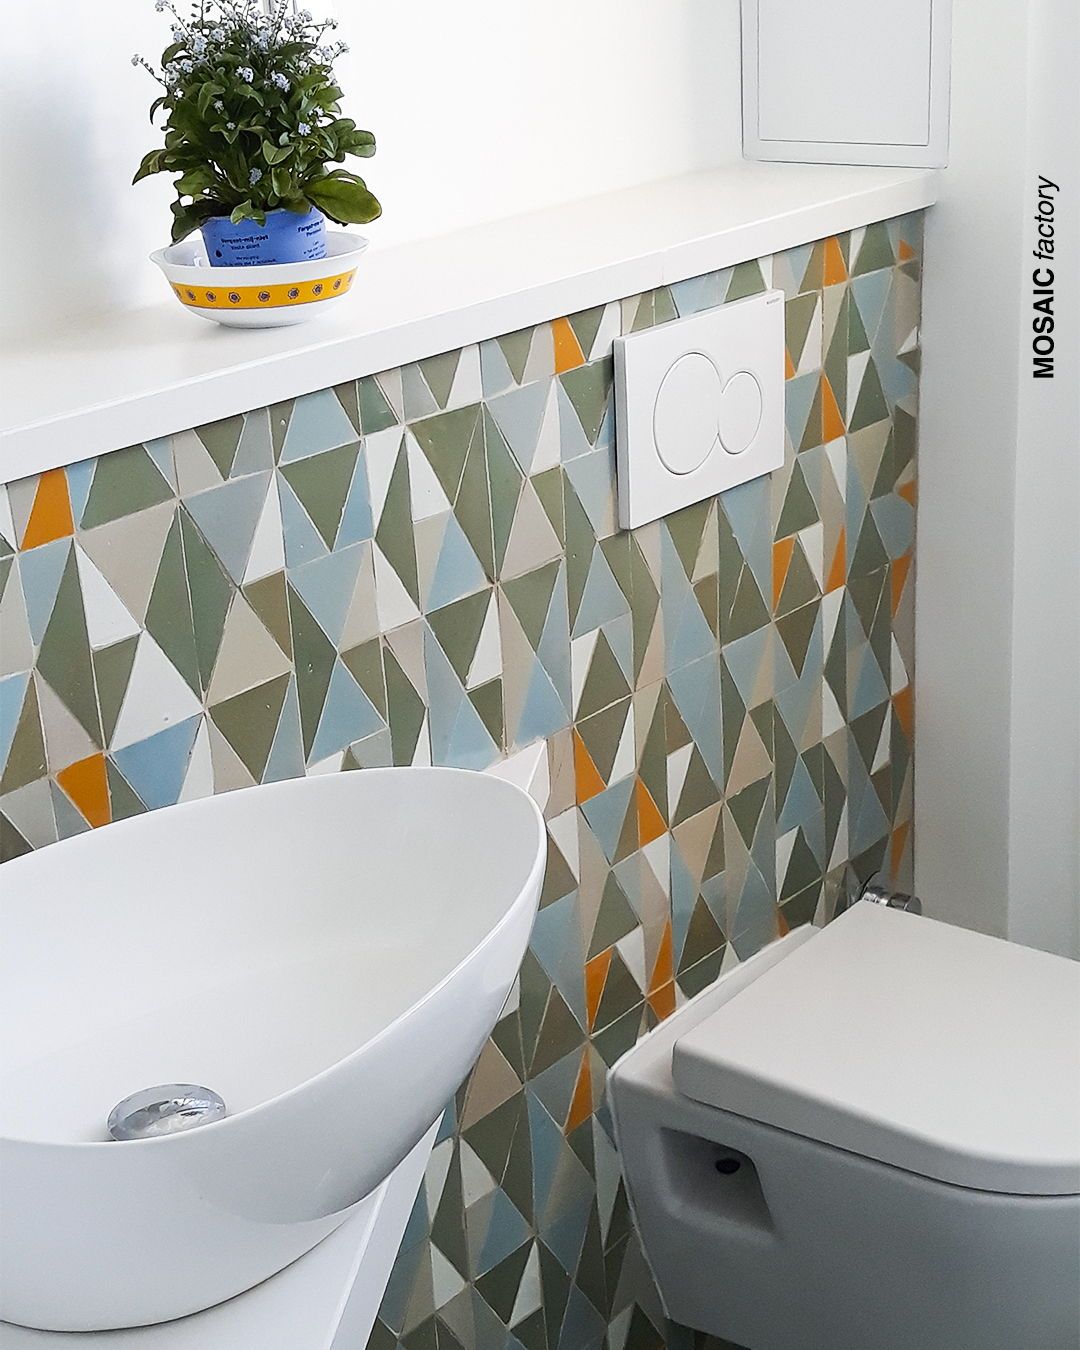 Moroccan Tile Fireplace Fresh Bathroom Vanity Wall Decorated with Triangular Mosaic Tiles